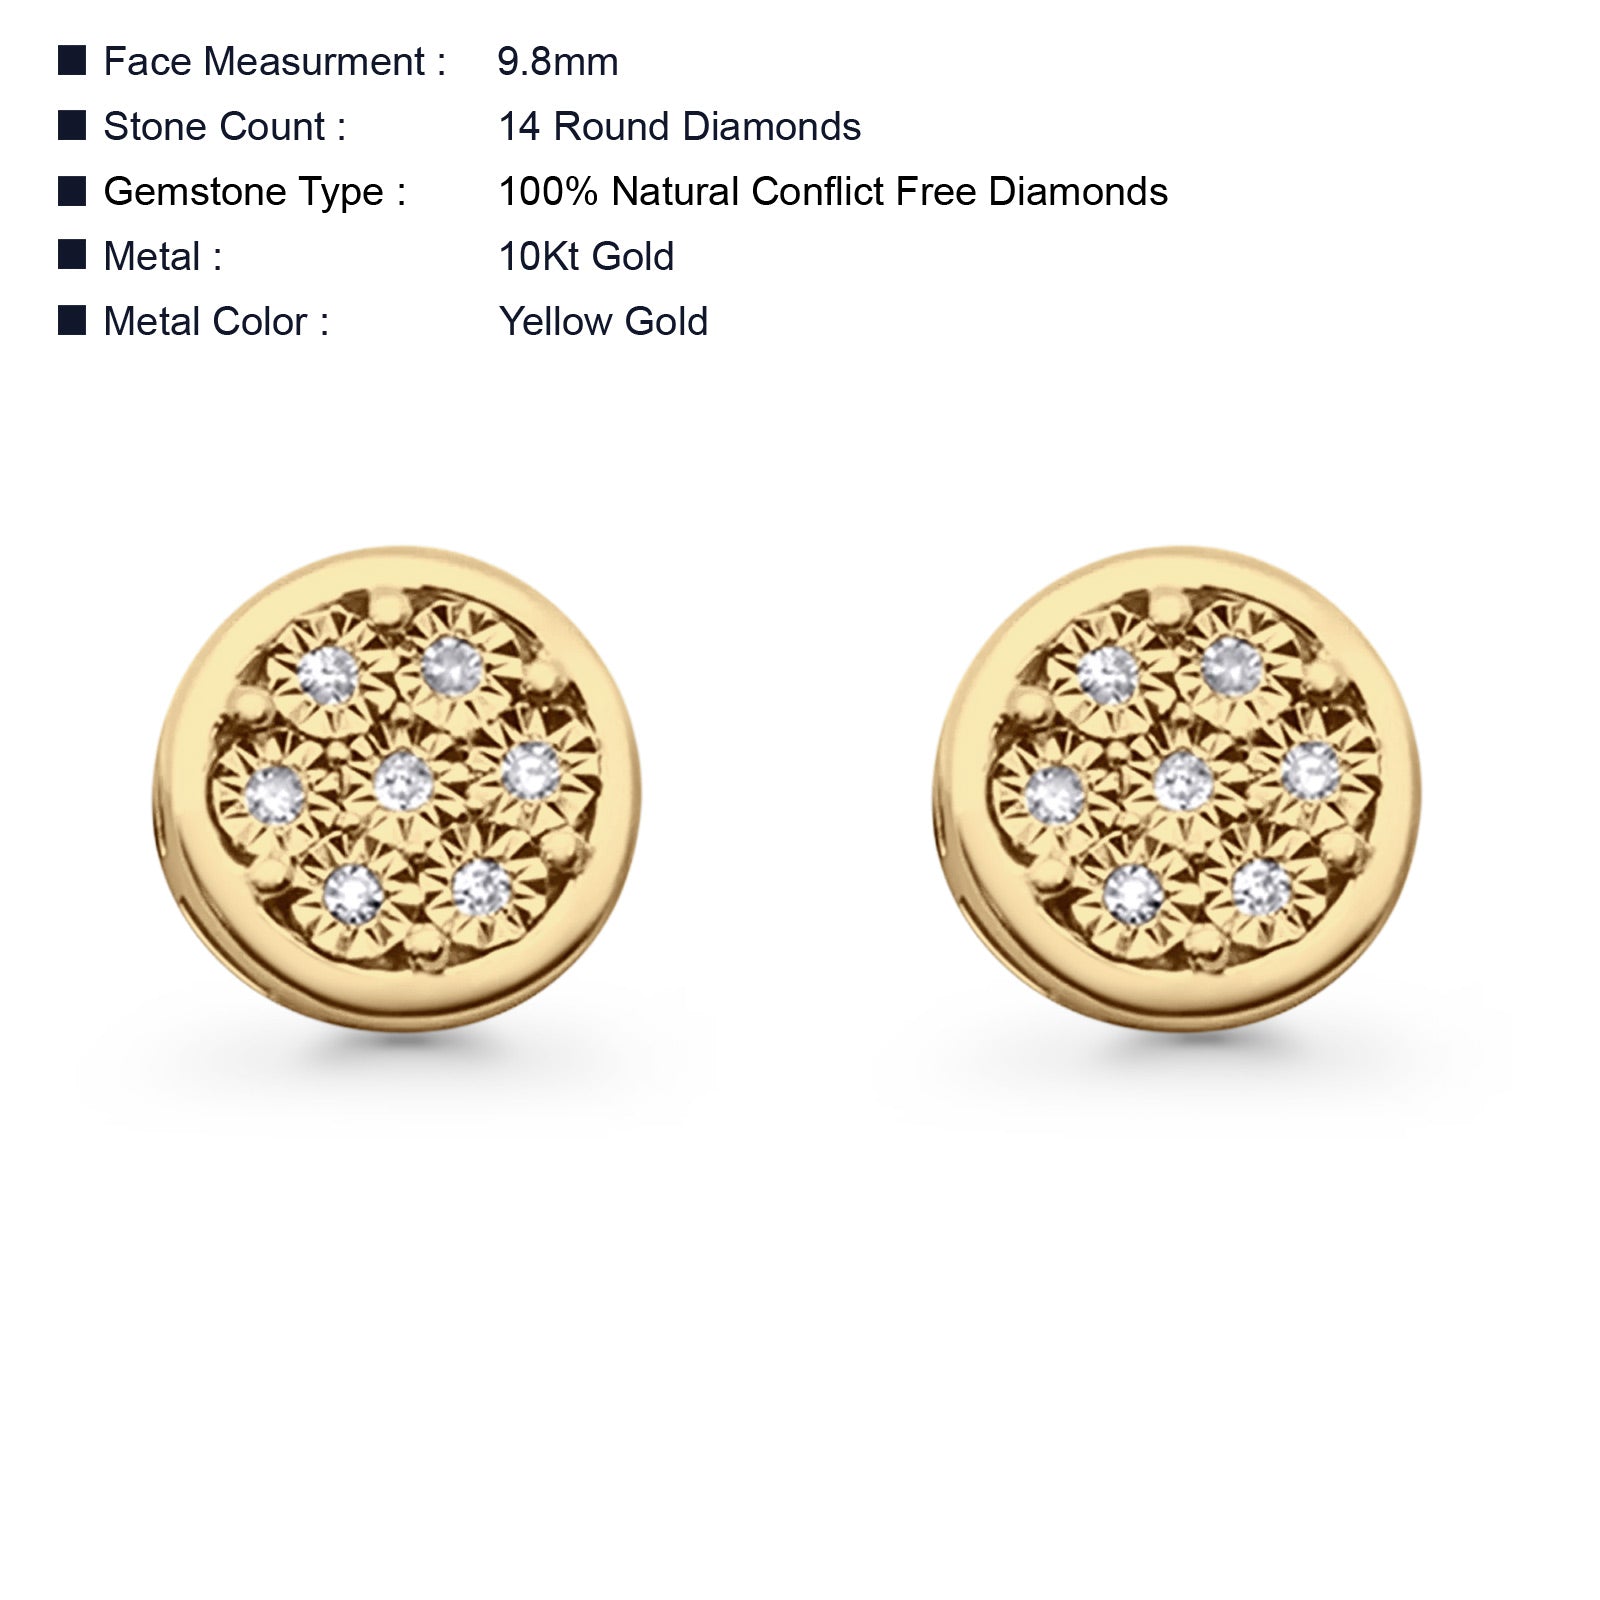 Solid 10K Gold 9.8mm Round Flower Design Pave Setting Diamond Stud Earring